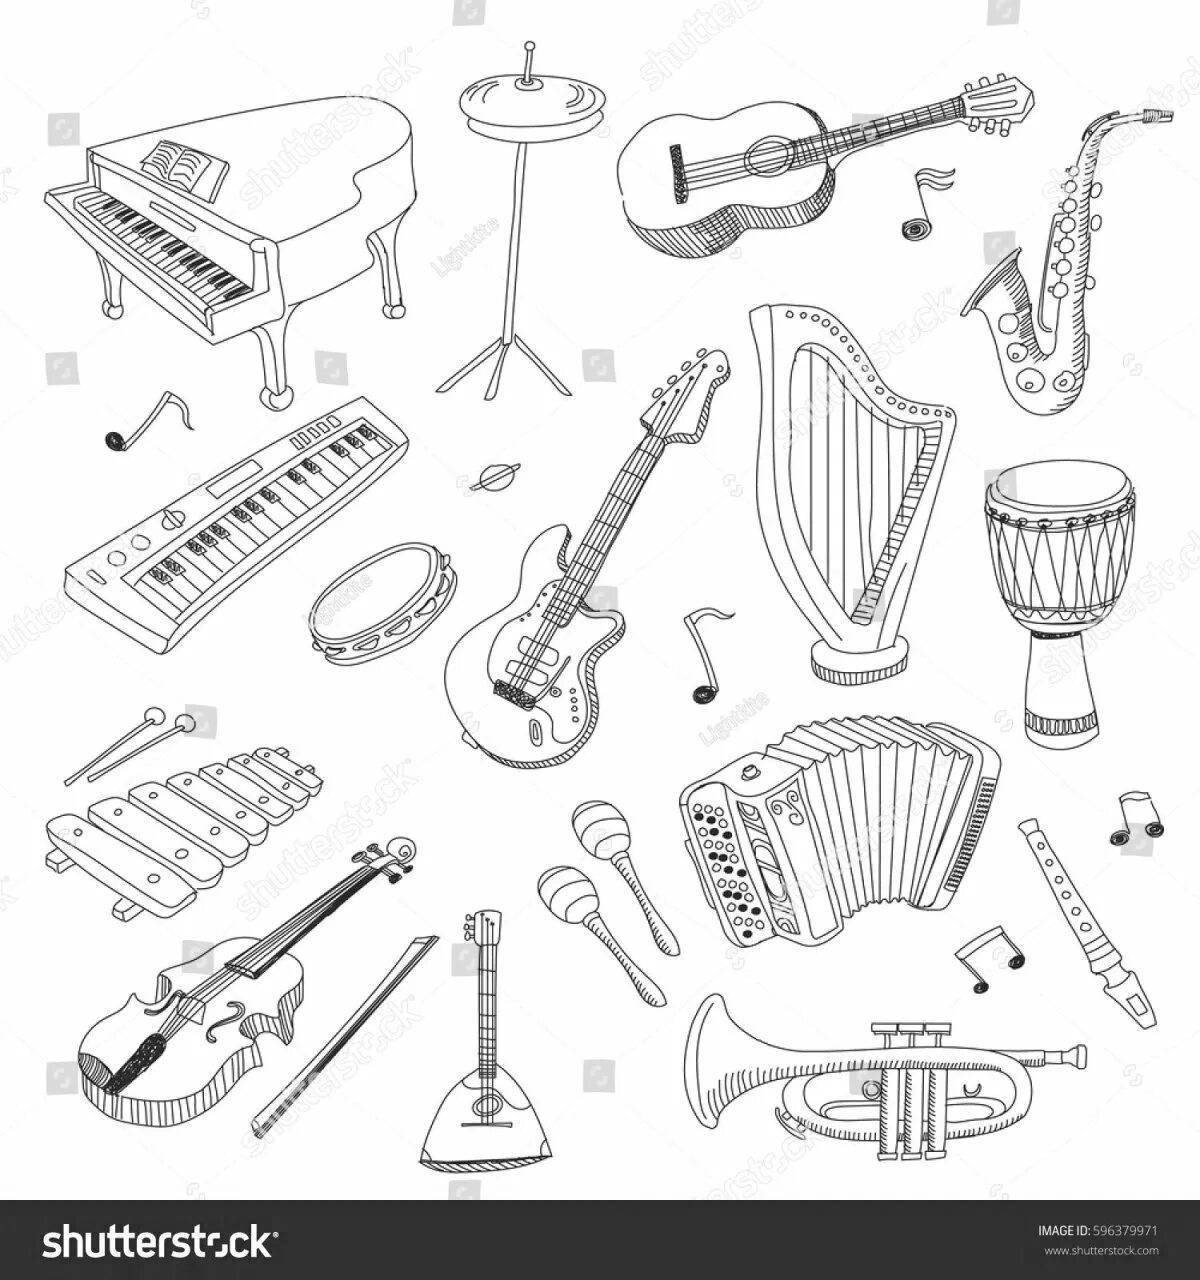 Coloring book famous musical instruments Grade 2